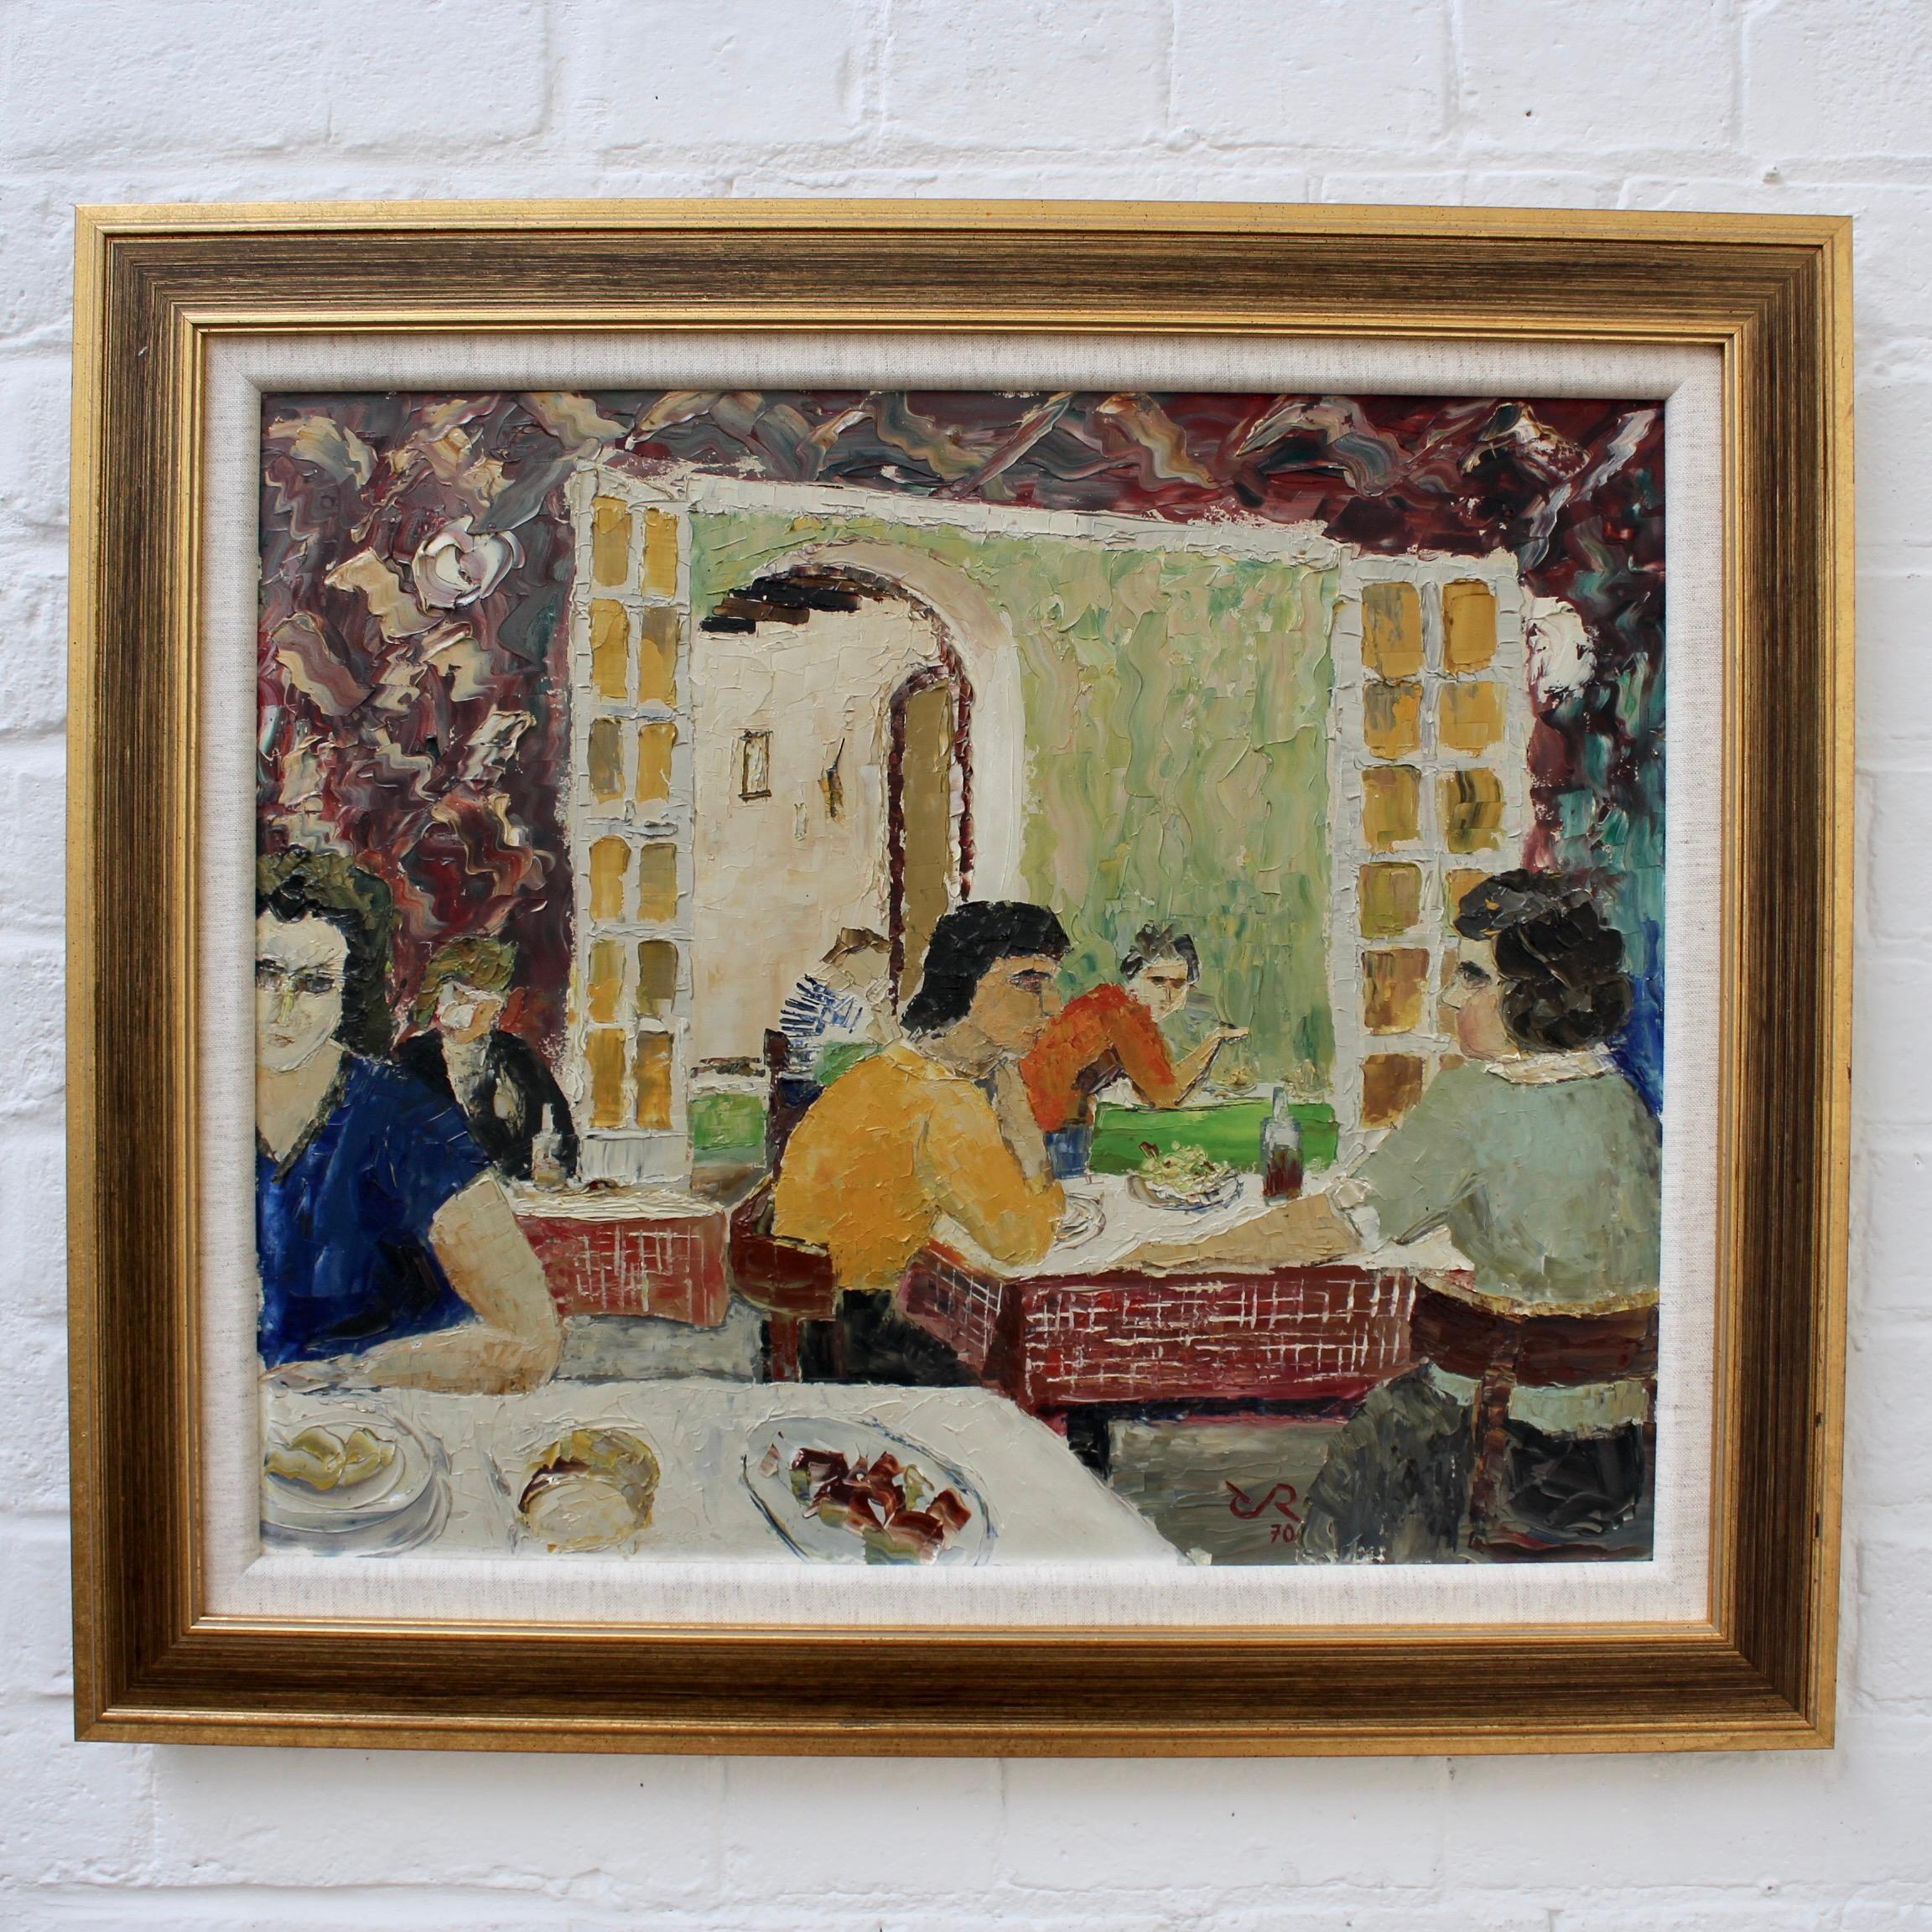 At the Table in a French Restaurant - Painting by Unknown